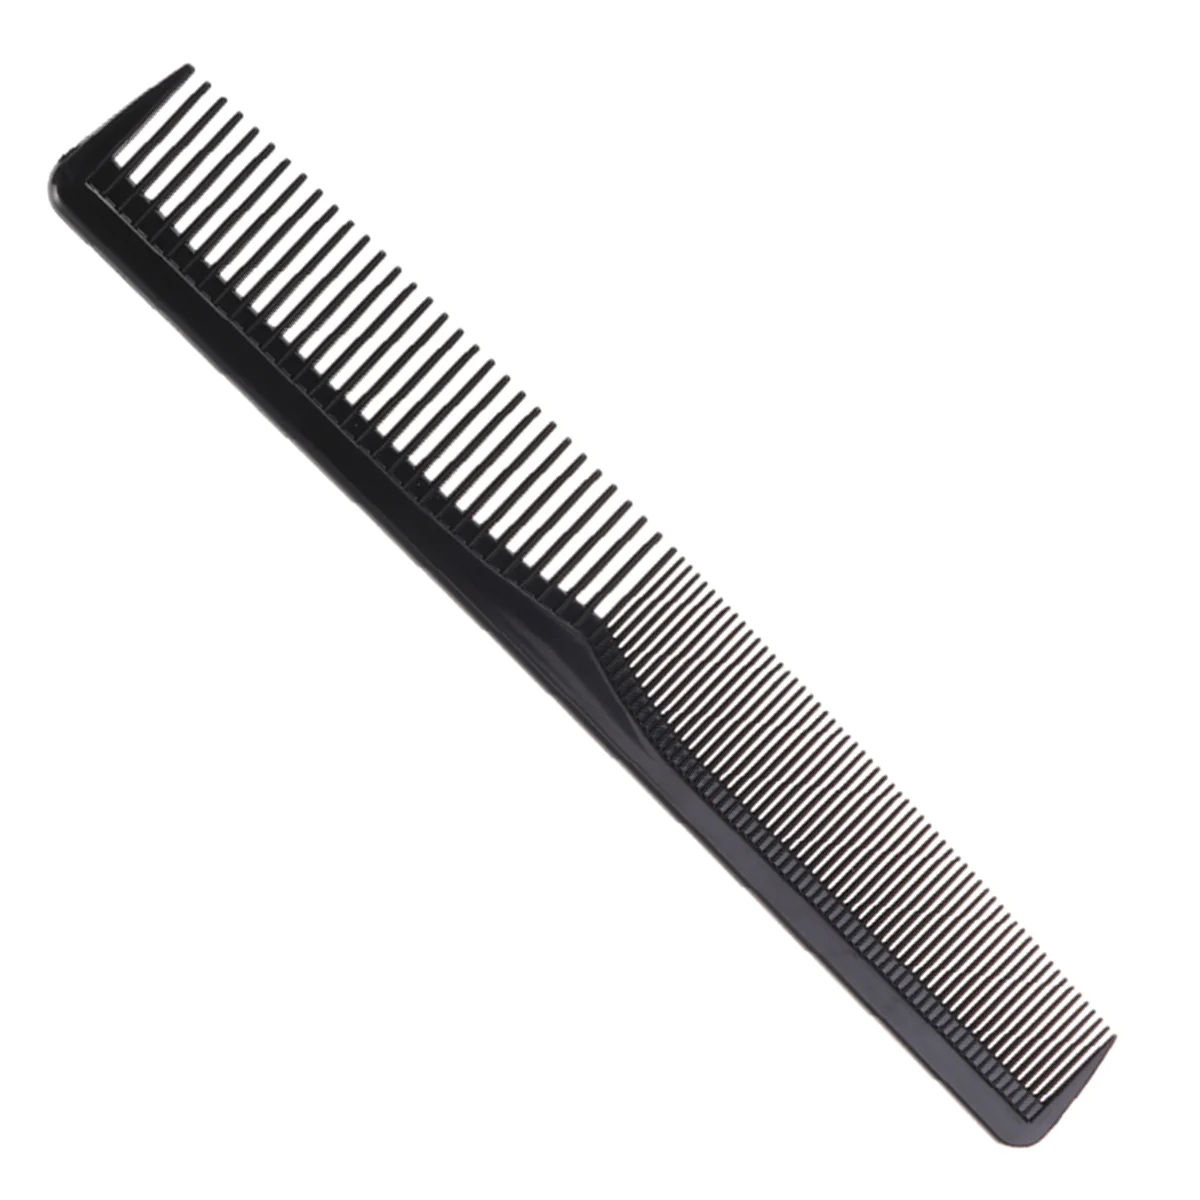 Practical Compact Plastic Anti-Static Tooth Design Hairdressing Double Side Pettine Hair Combs Hair Brushes For Salon Home Hotel